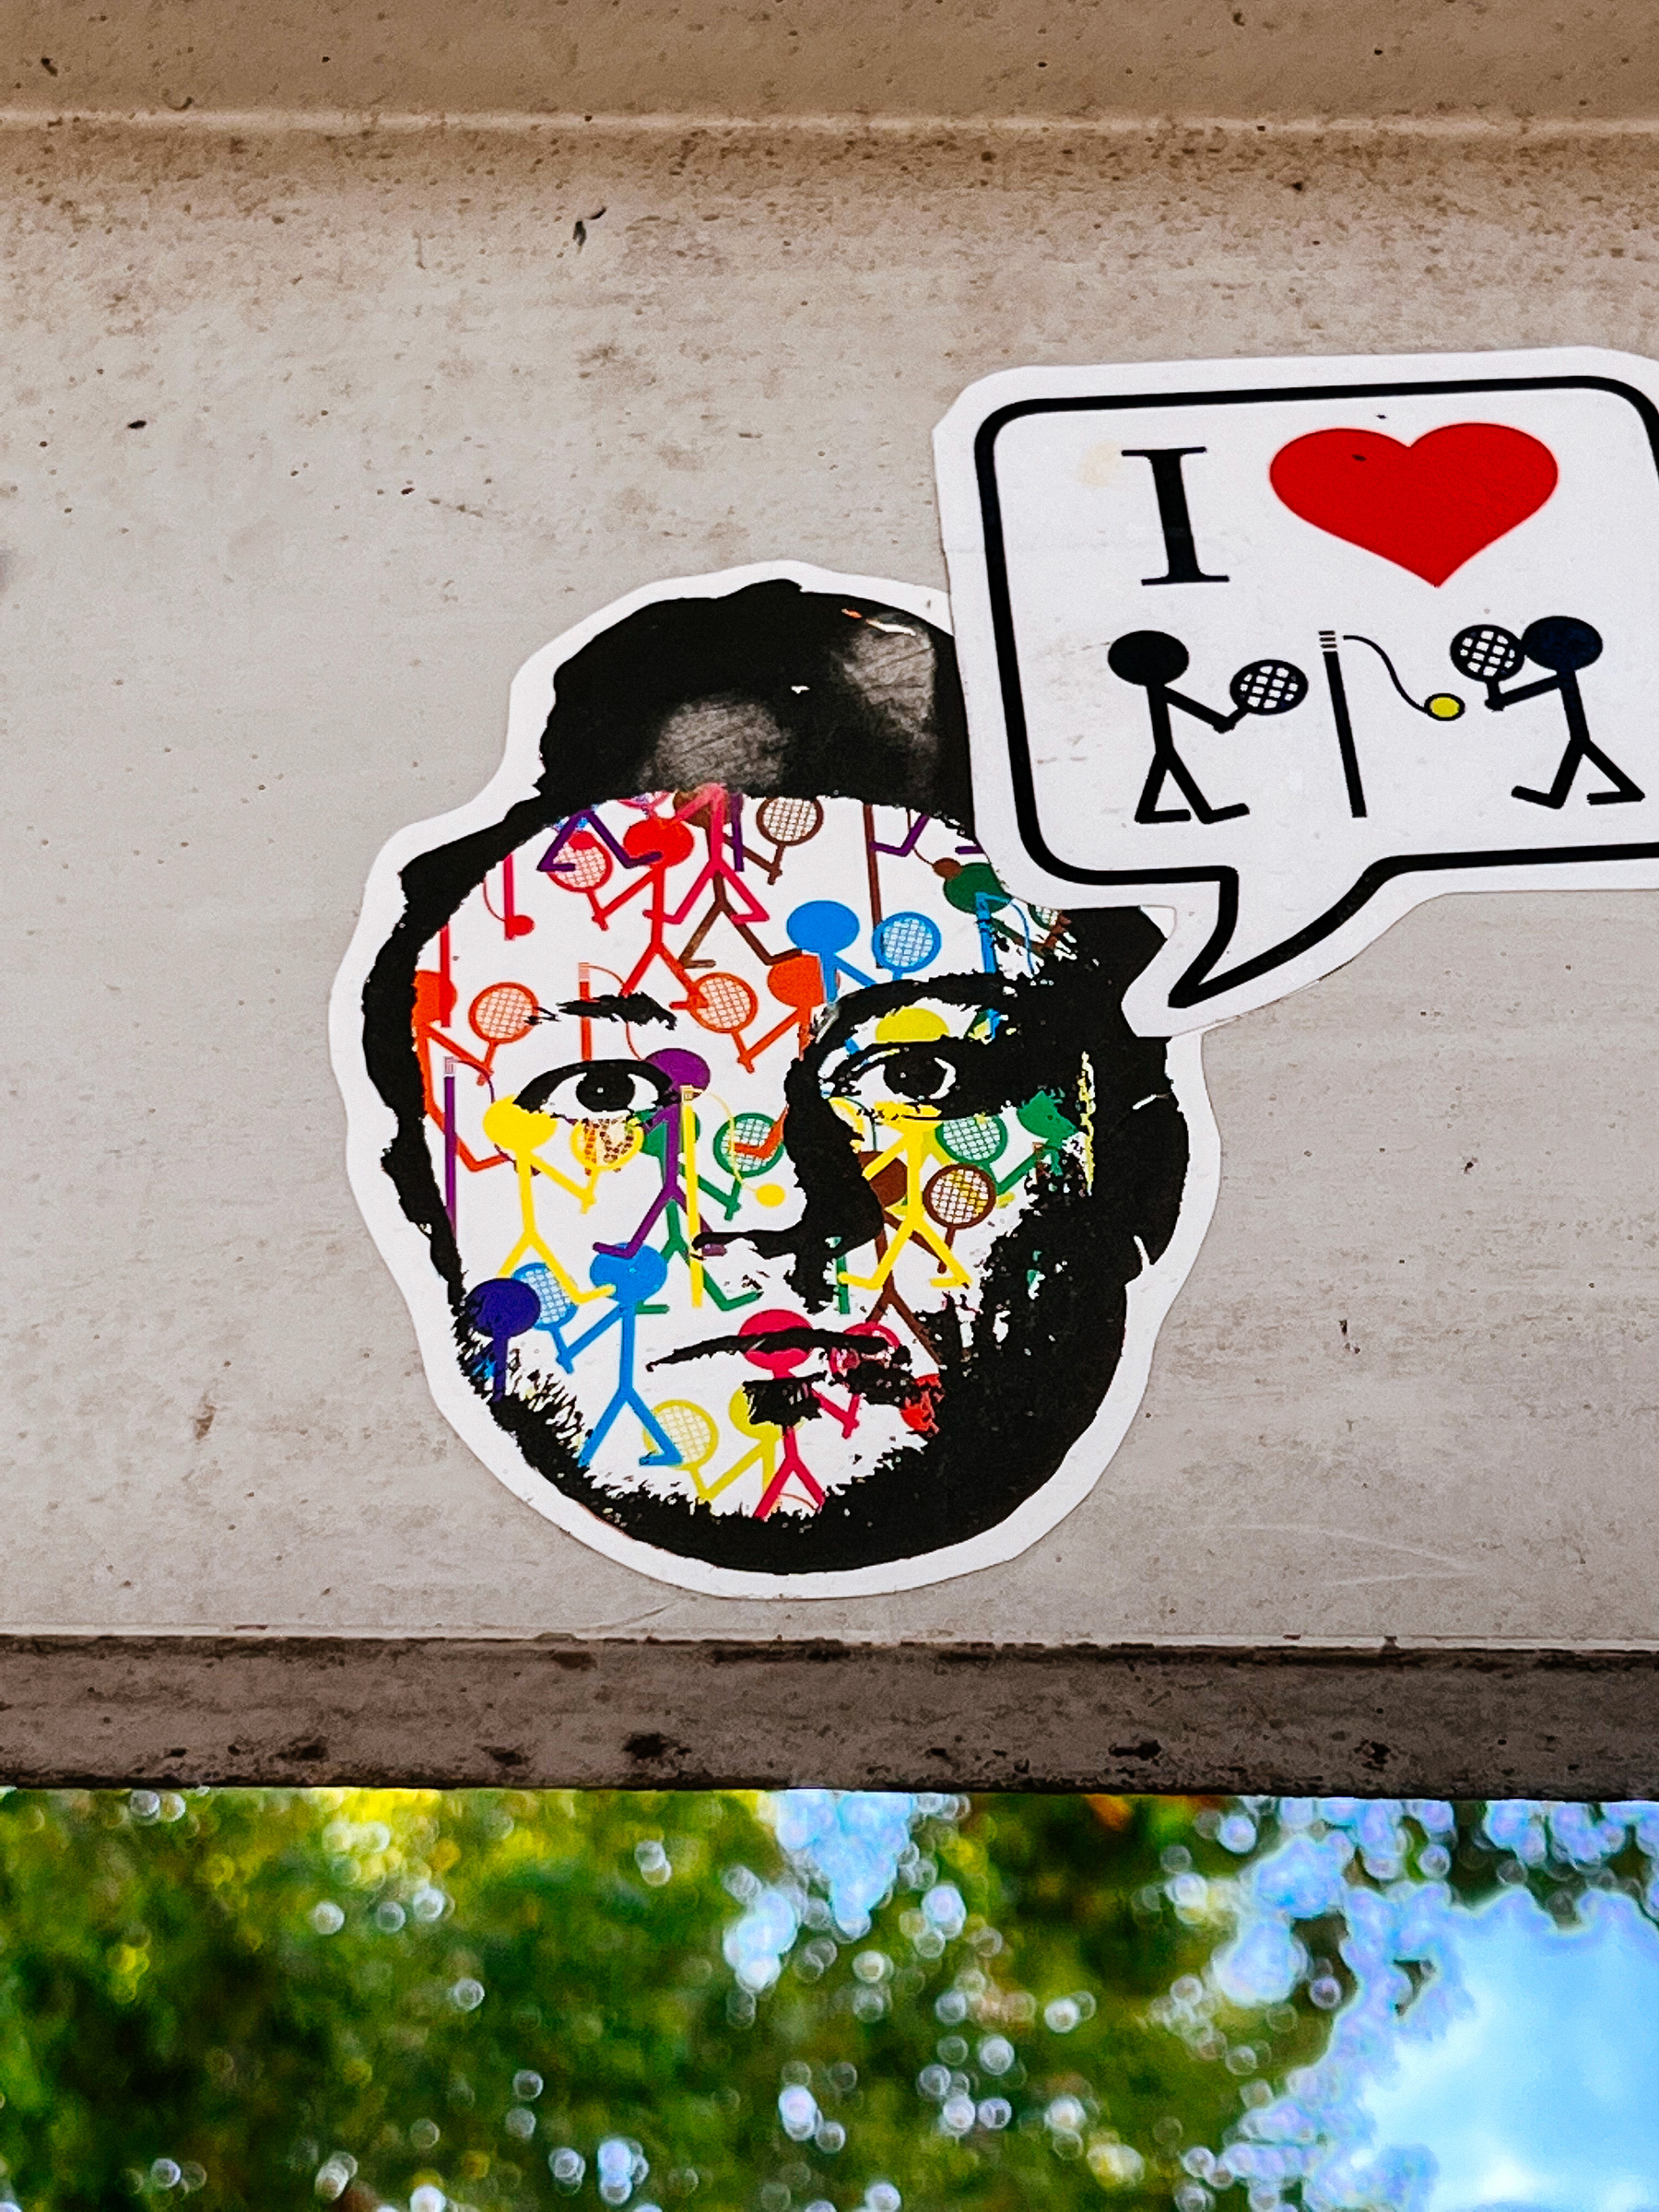 Sticker of what looks like the face of Conan O’Brien, with rainbow colored tennis playing stick figures all over his face.